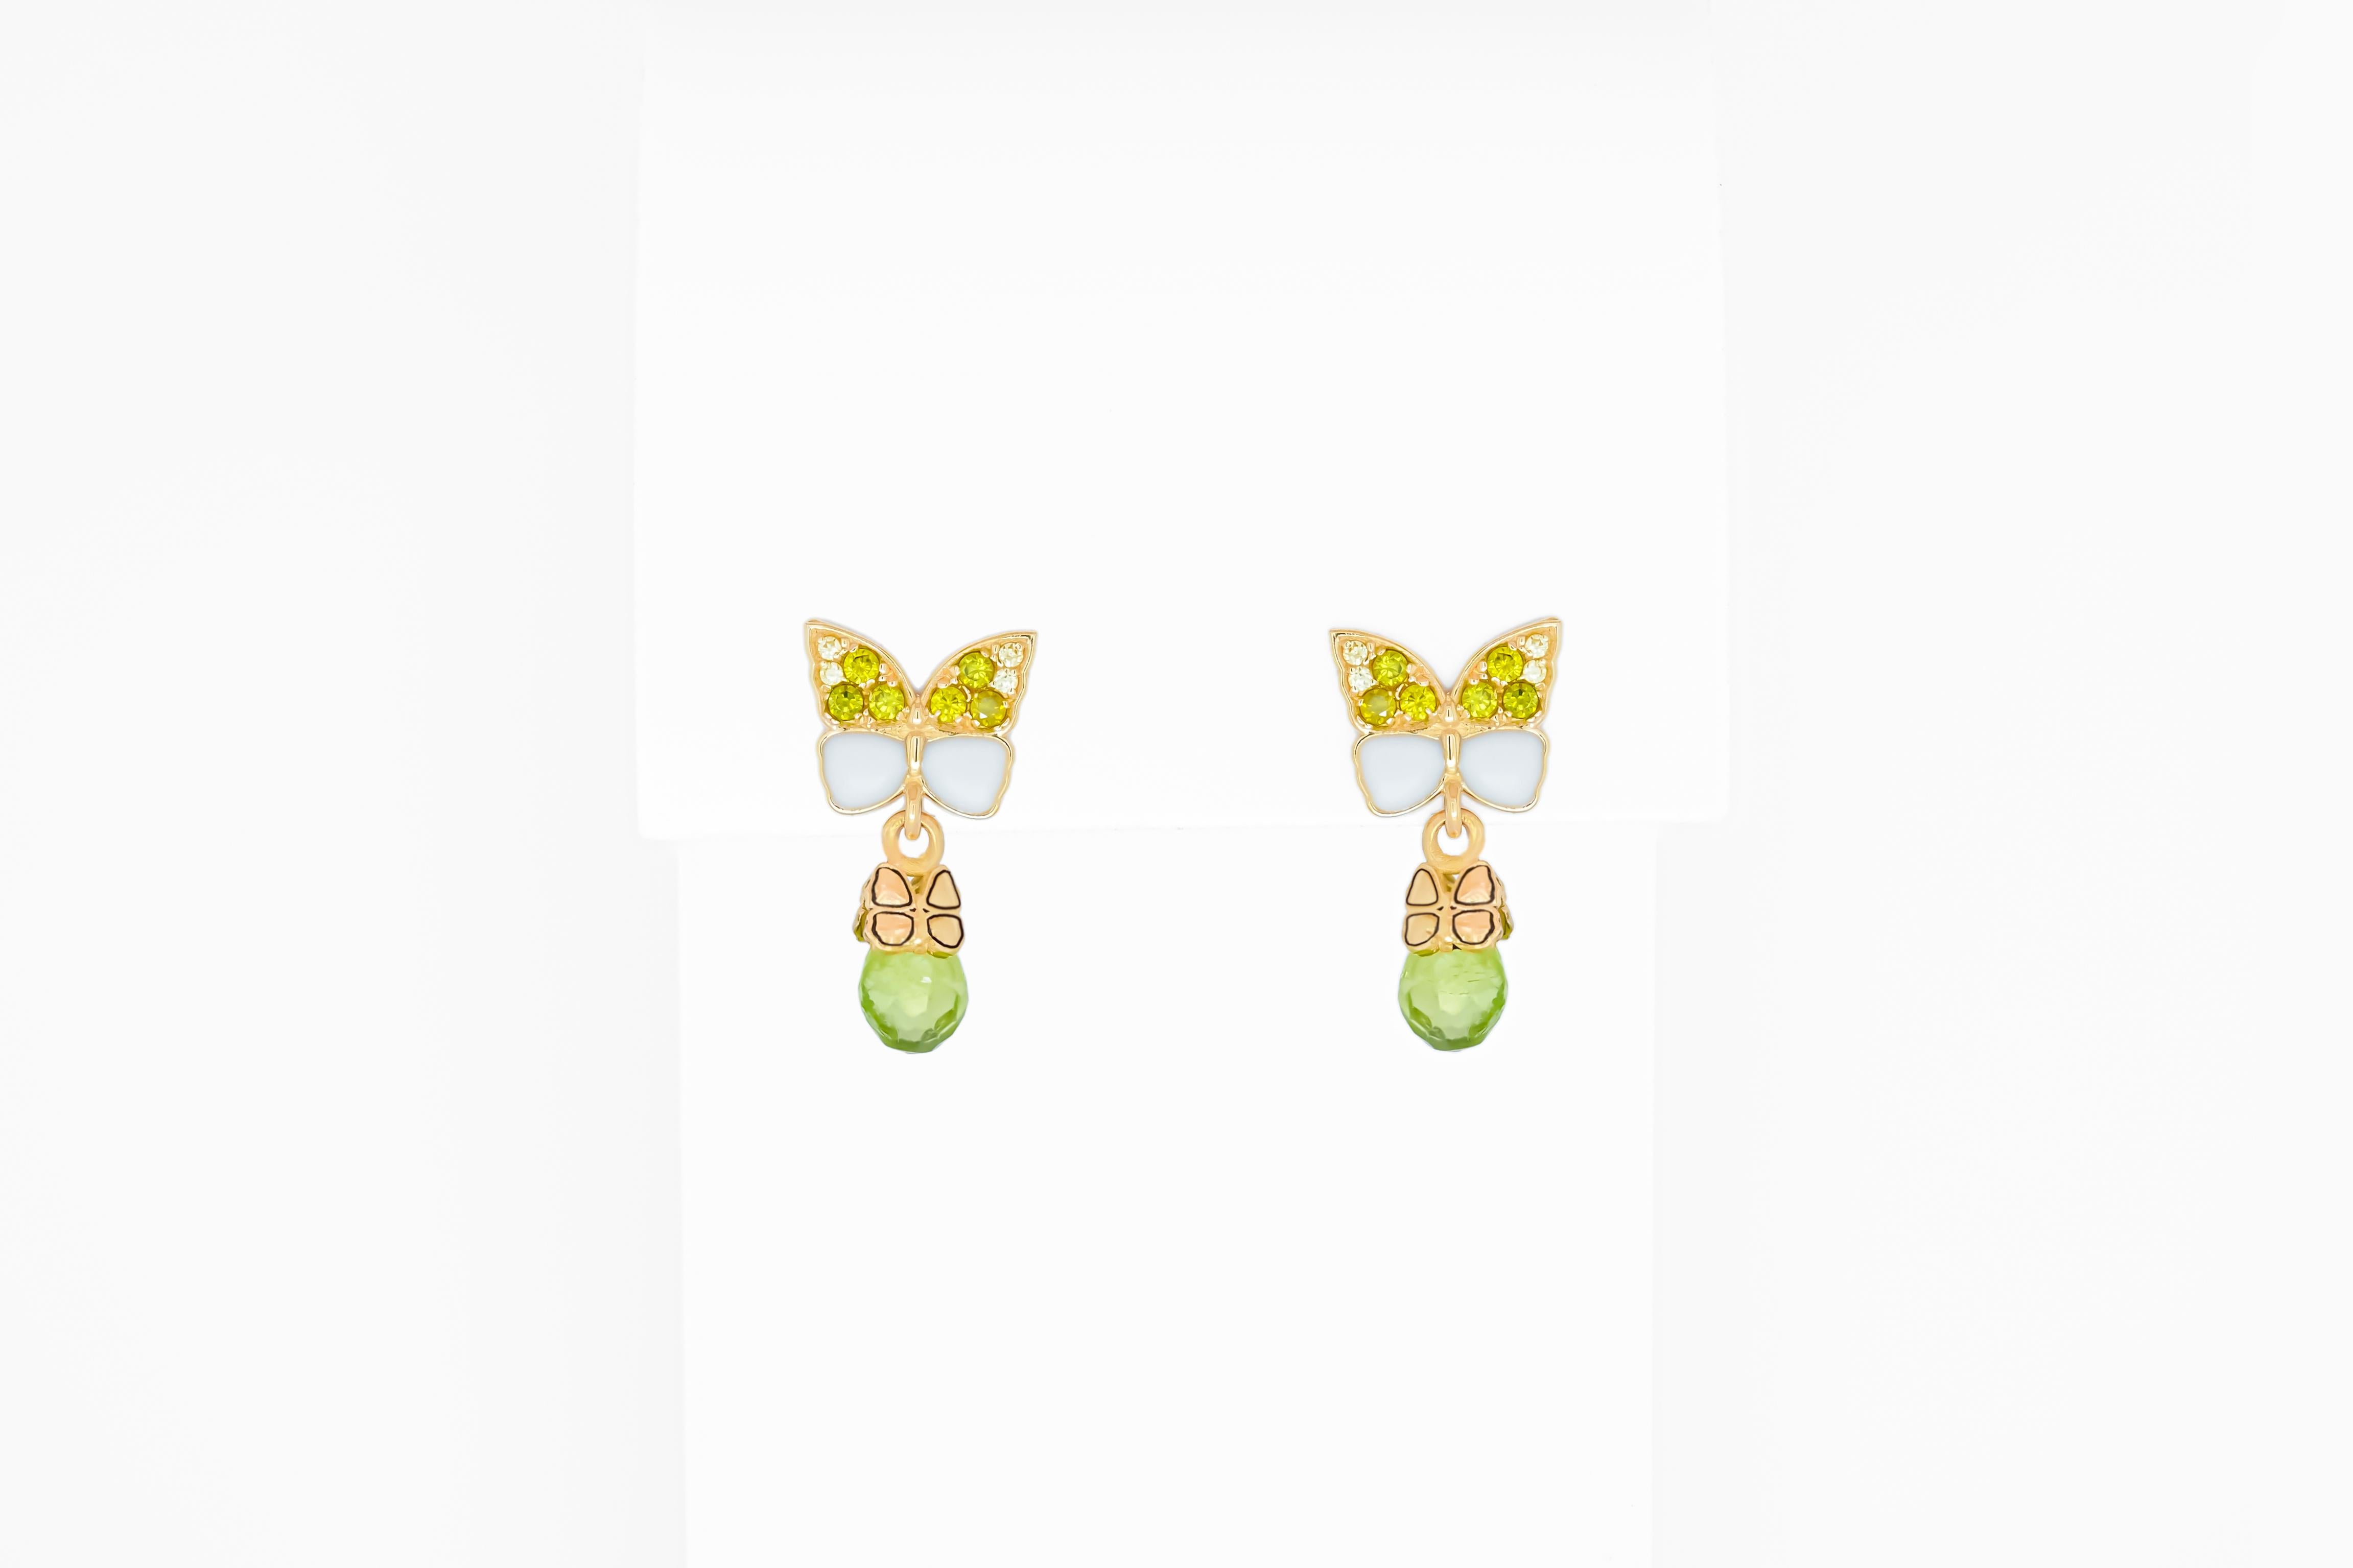 Butterfly 14k  gold earrings with peridot briolettes. 
Peridot Dangle Earrings for Women. Peridot Drop Earrings. Beautiful earrings for everyday wearing. 

Metal: 14 karat gold
Weight: 3 g.
Size: 19x10
Peridots 2 pieces - apple green color,